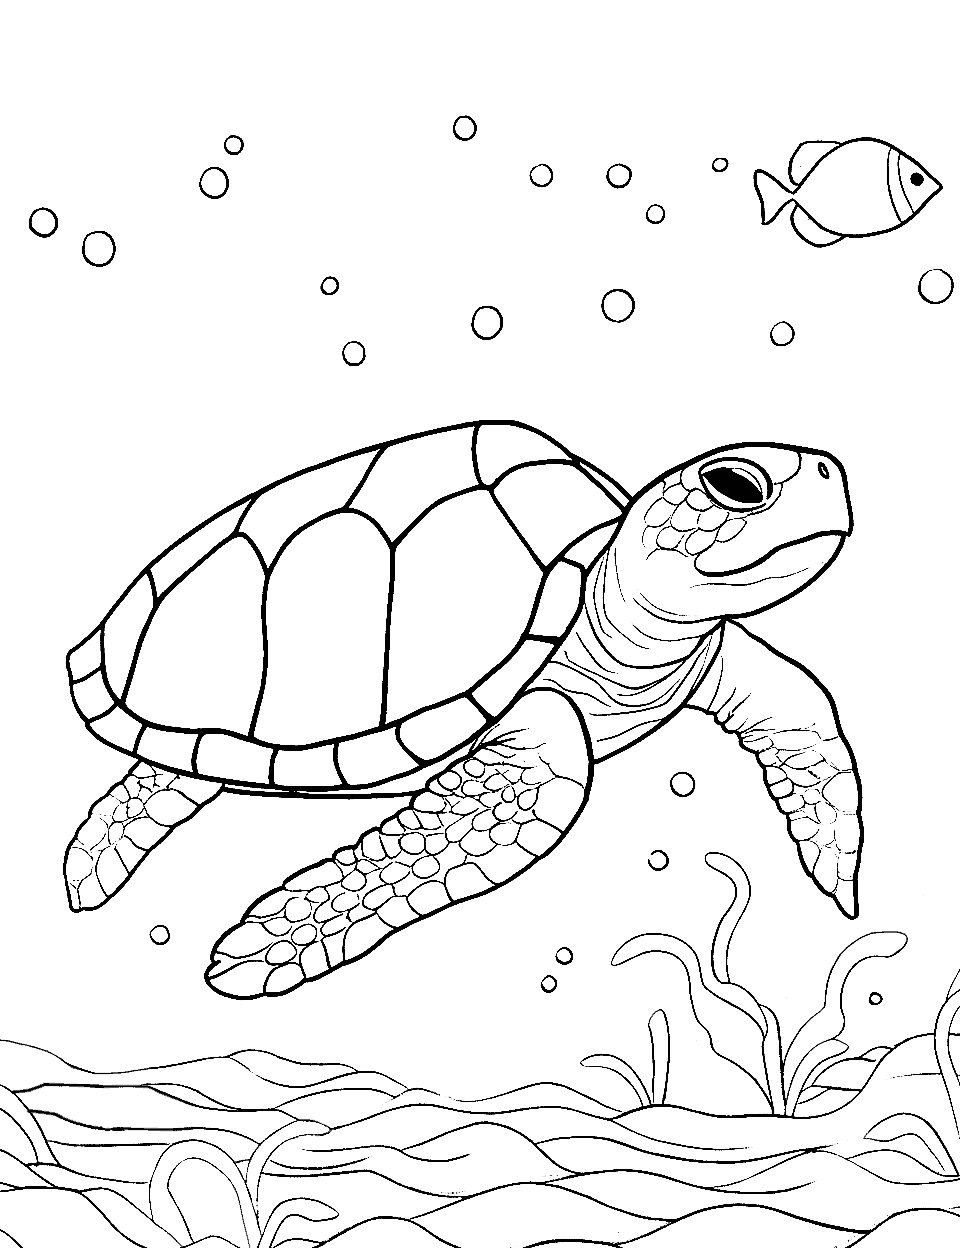 Turtle's Secret Friend Turtle Coloring Page - A turtle swimming with a fish.